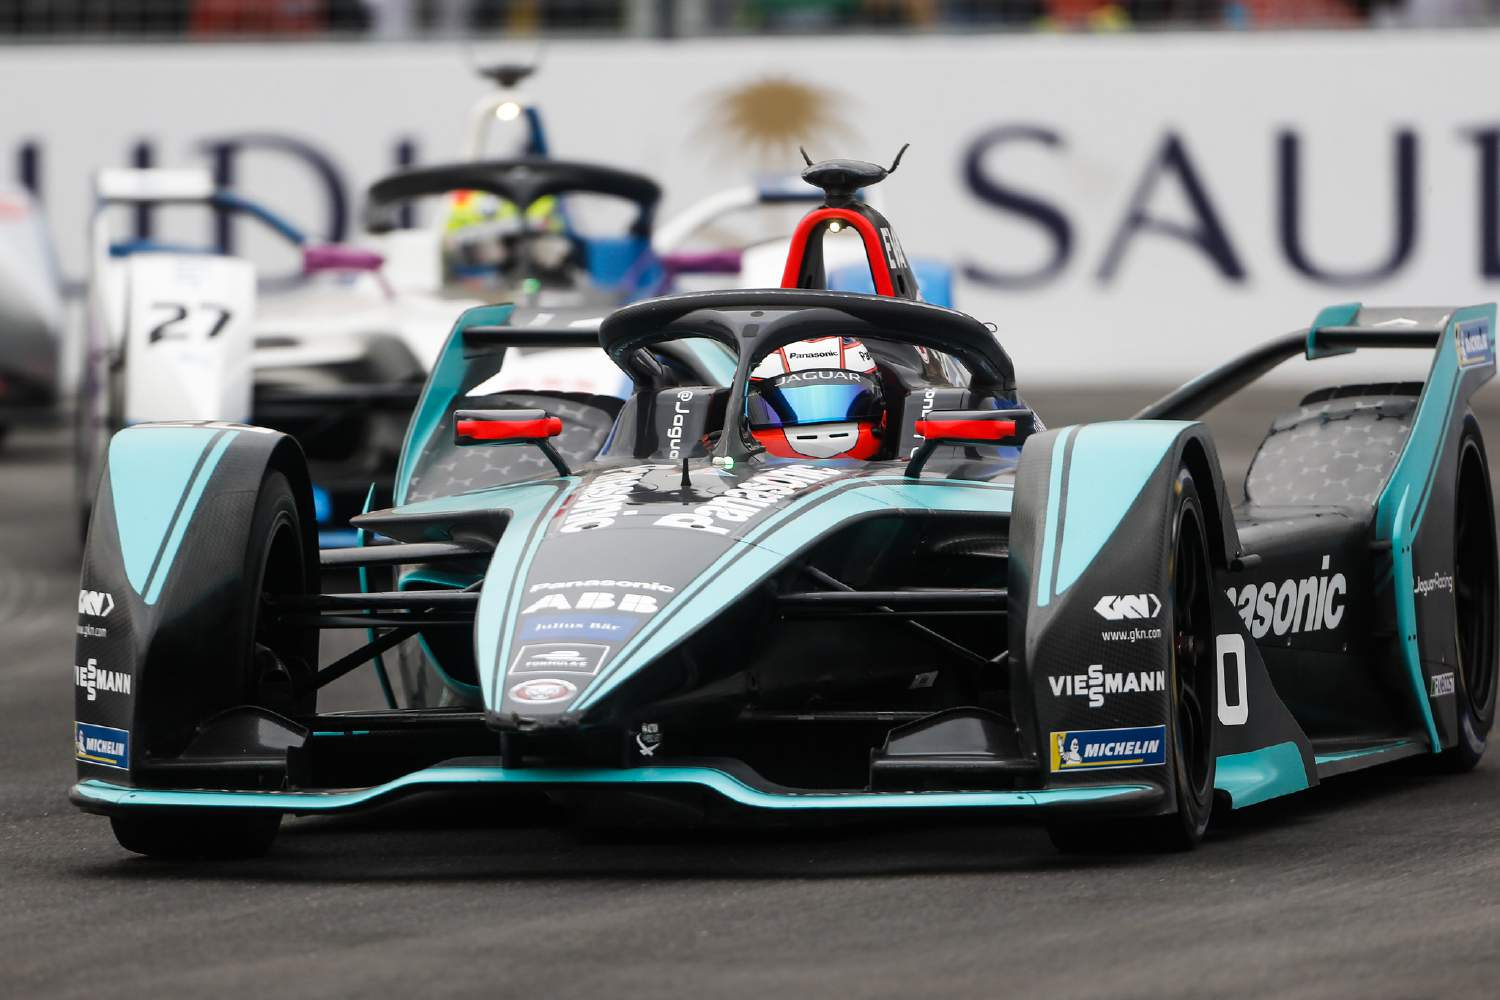 Why we need to pay more attention to Formula E